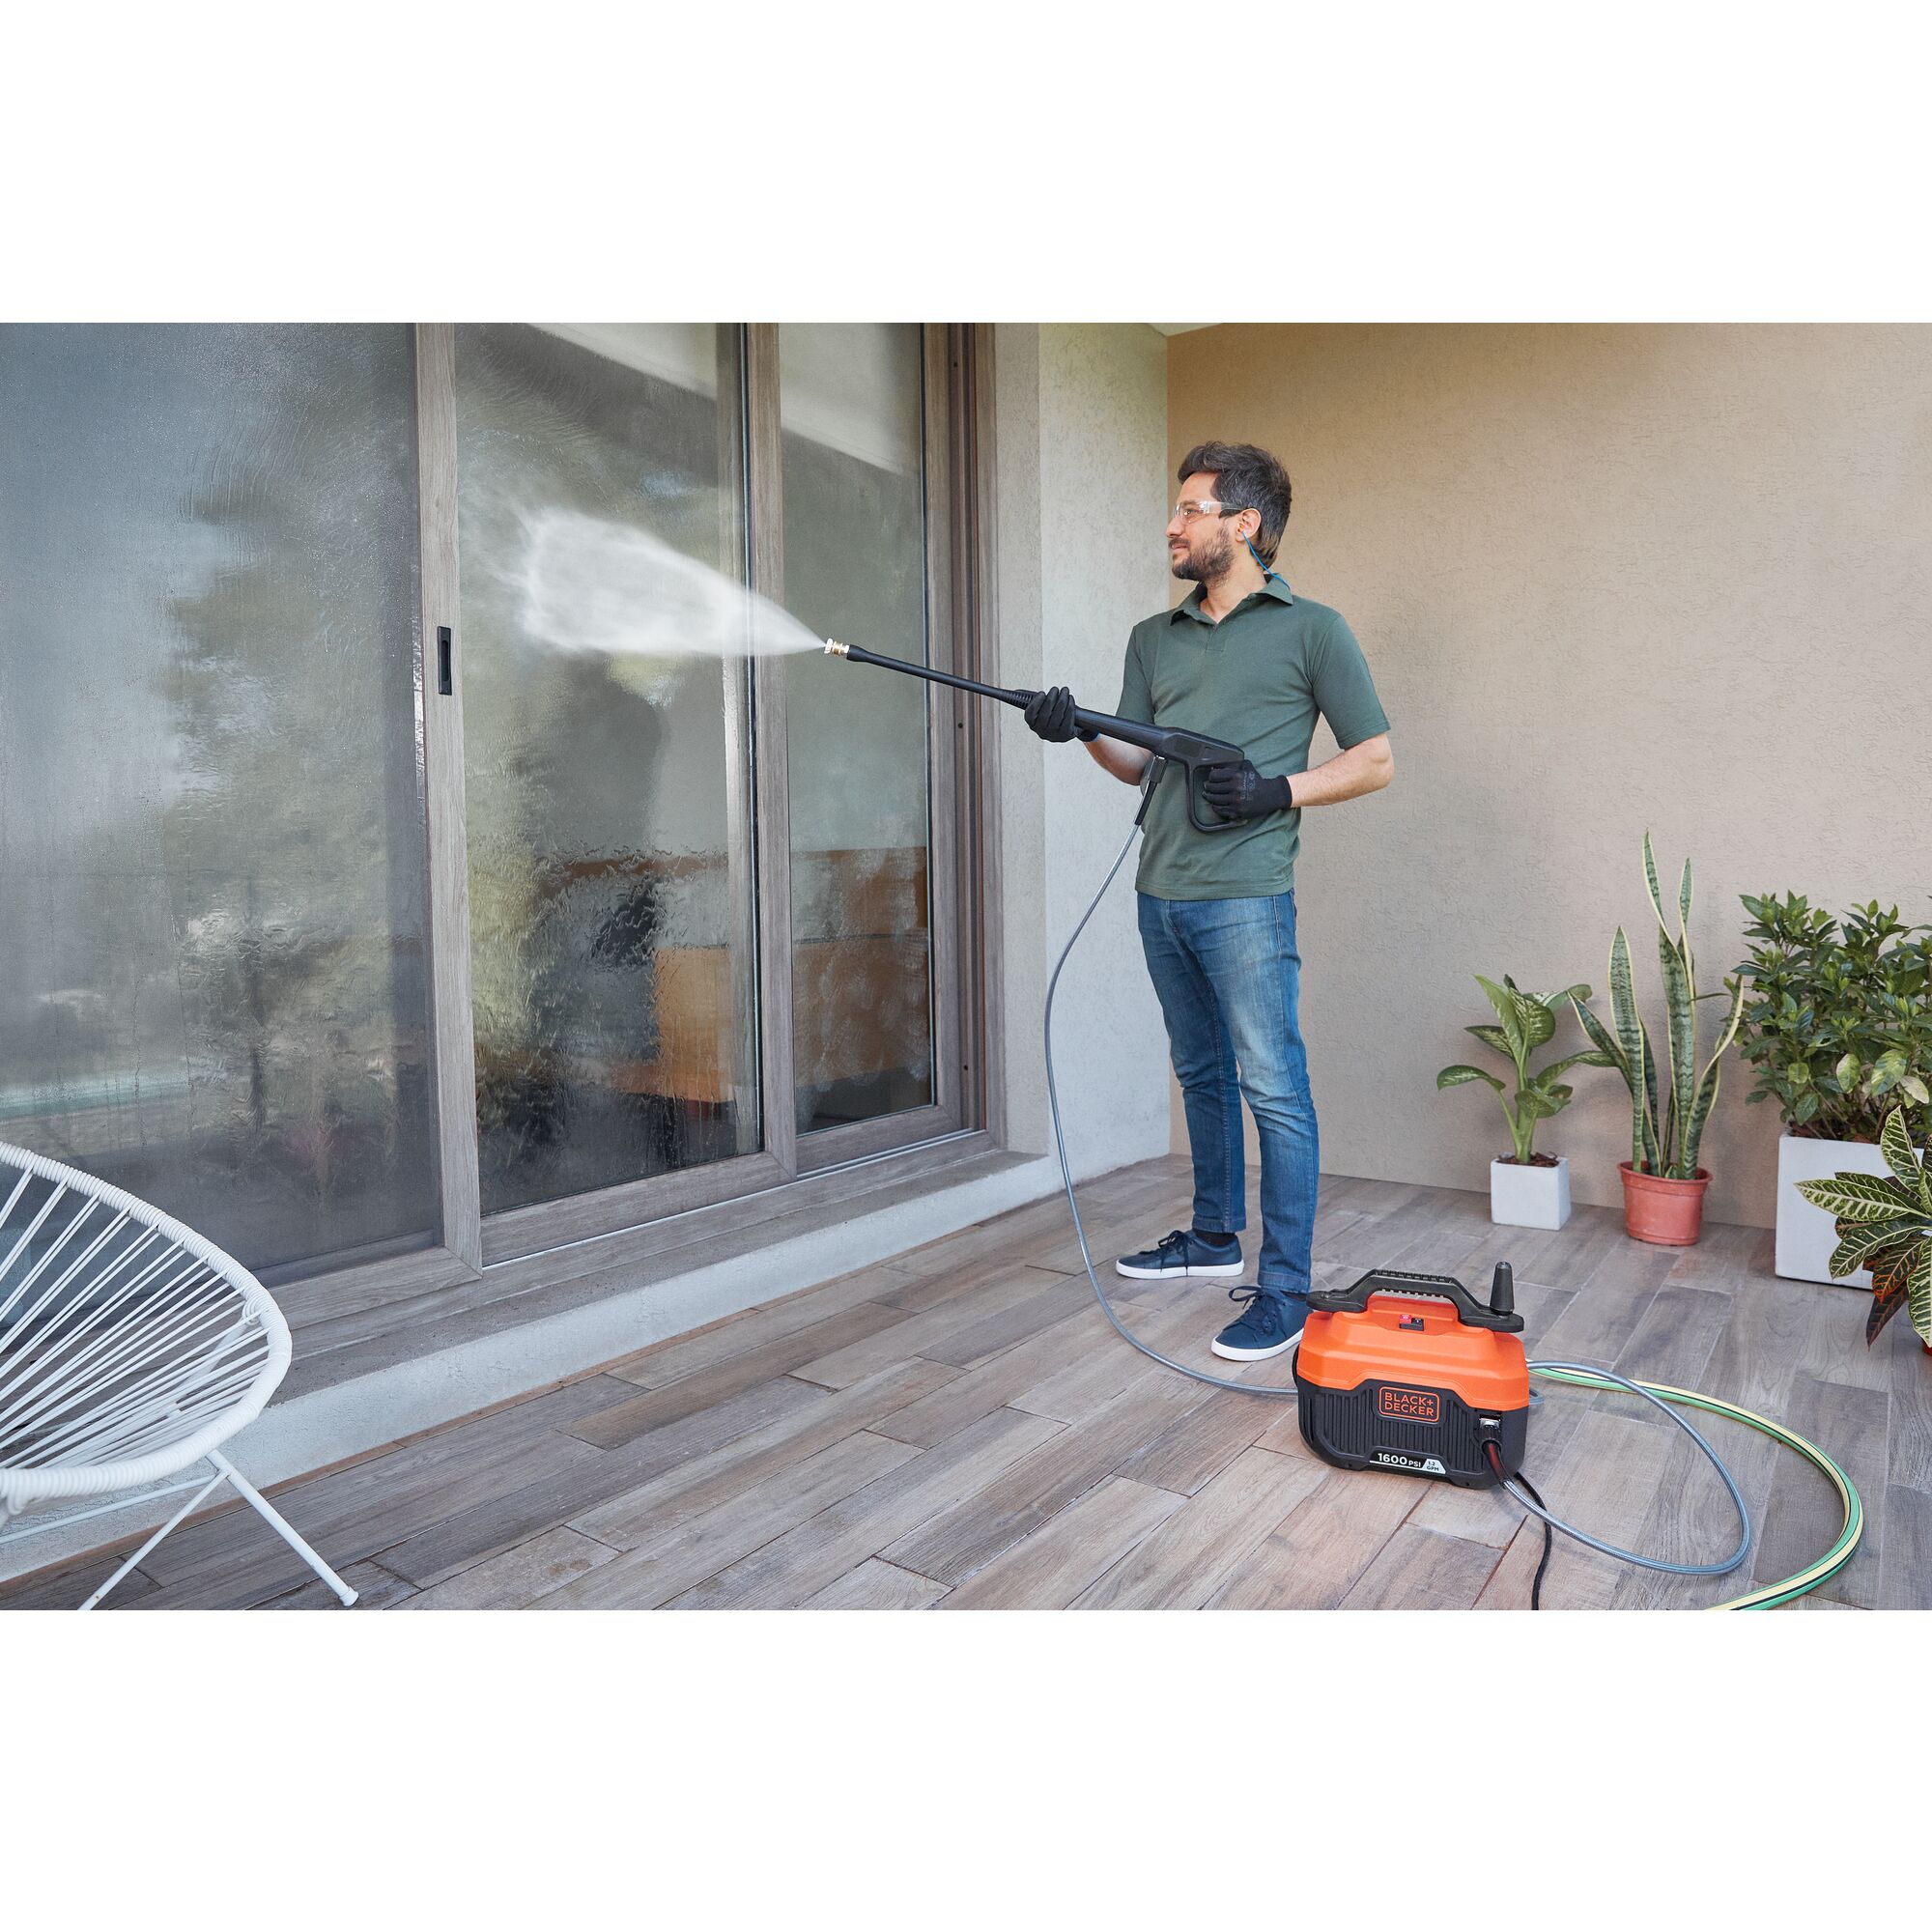 Man using BLACK+DECKER 1,600 MAX* psi pressure washer with 40\u02da nozzle to clean a house window on a patio